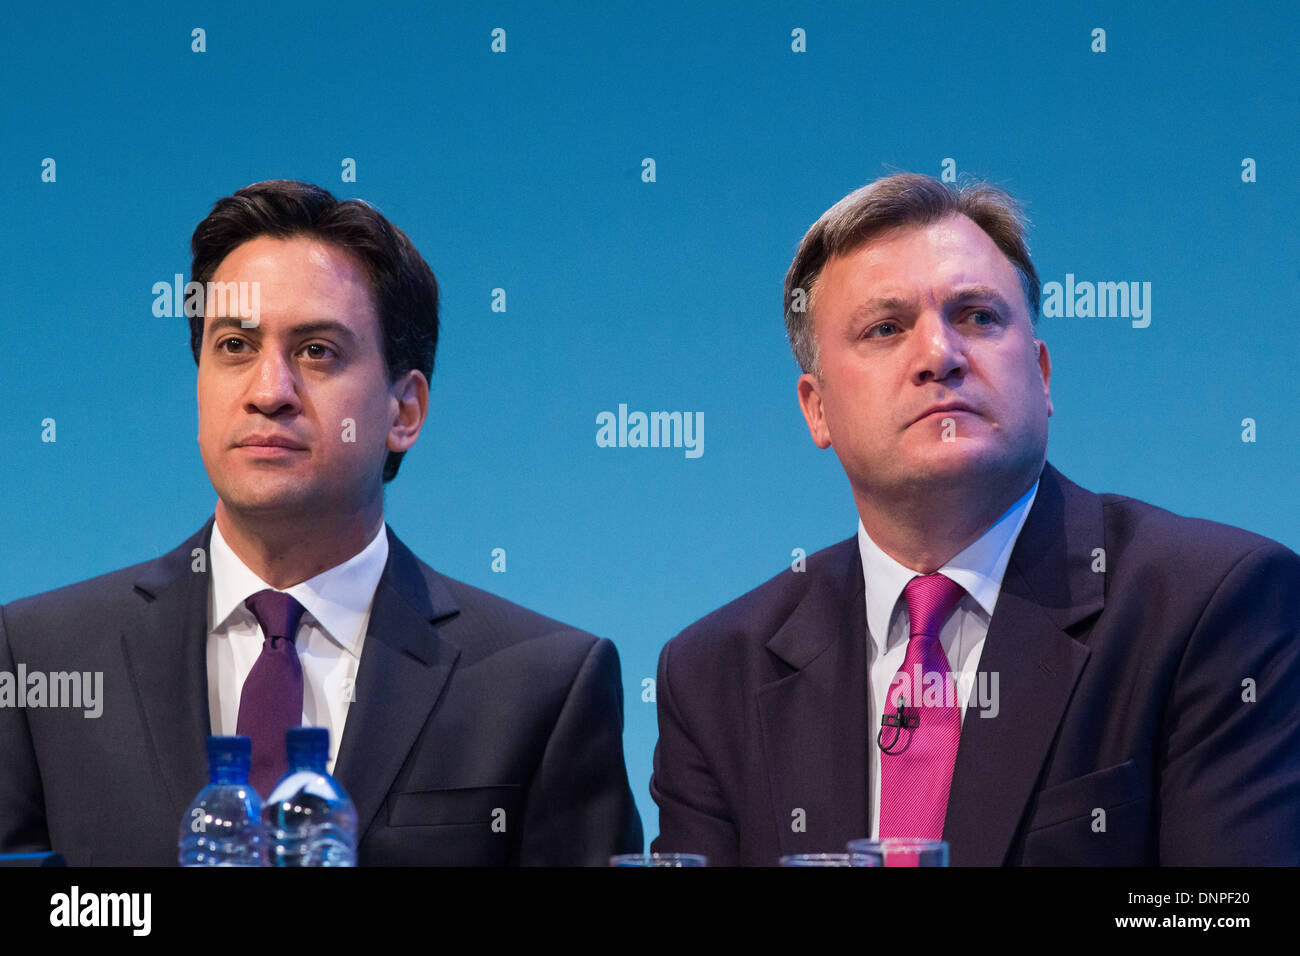 The Two Eds-Miliband and Balls,Leader and Chancellor, at the Labour party conference in Brighton 2013 Stock Photo